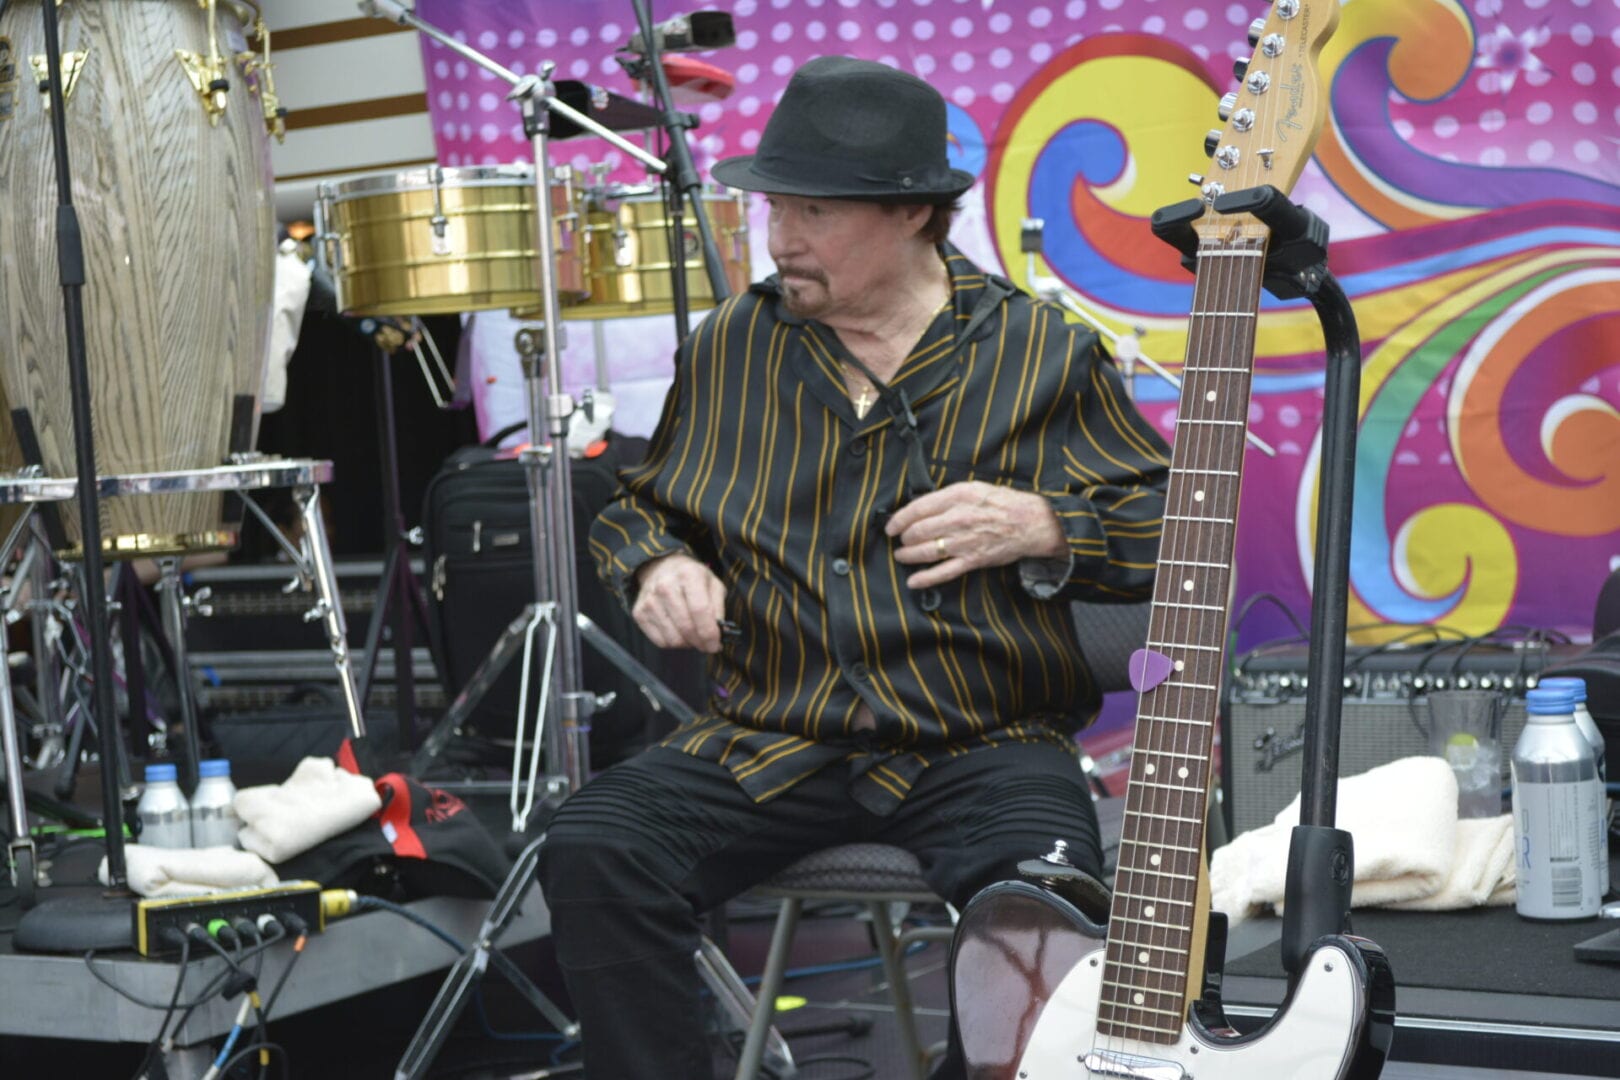 A man sitting in front of a guitar and drums.